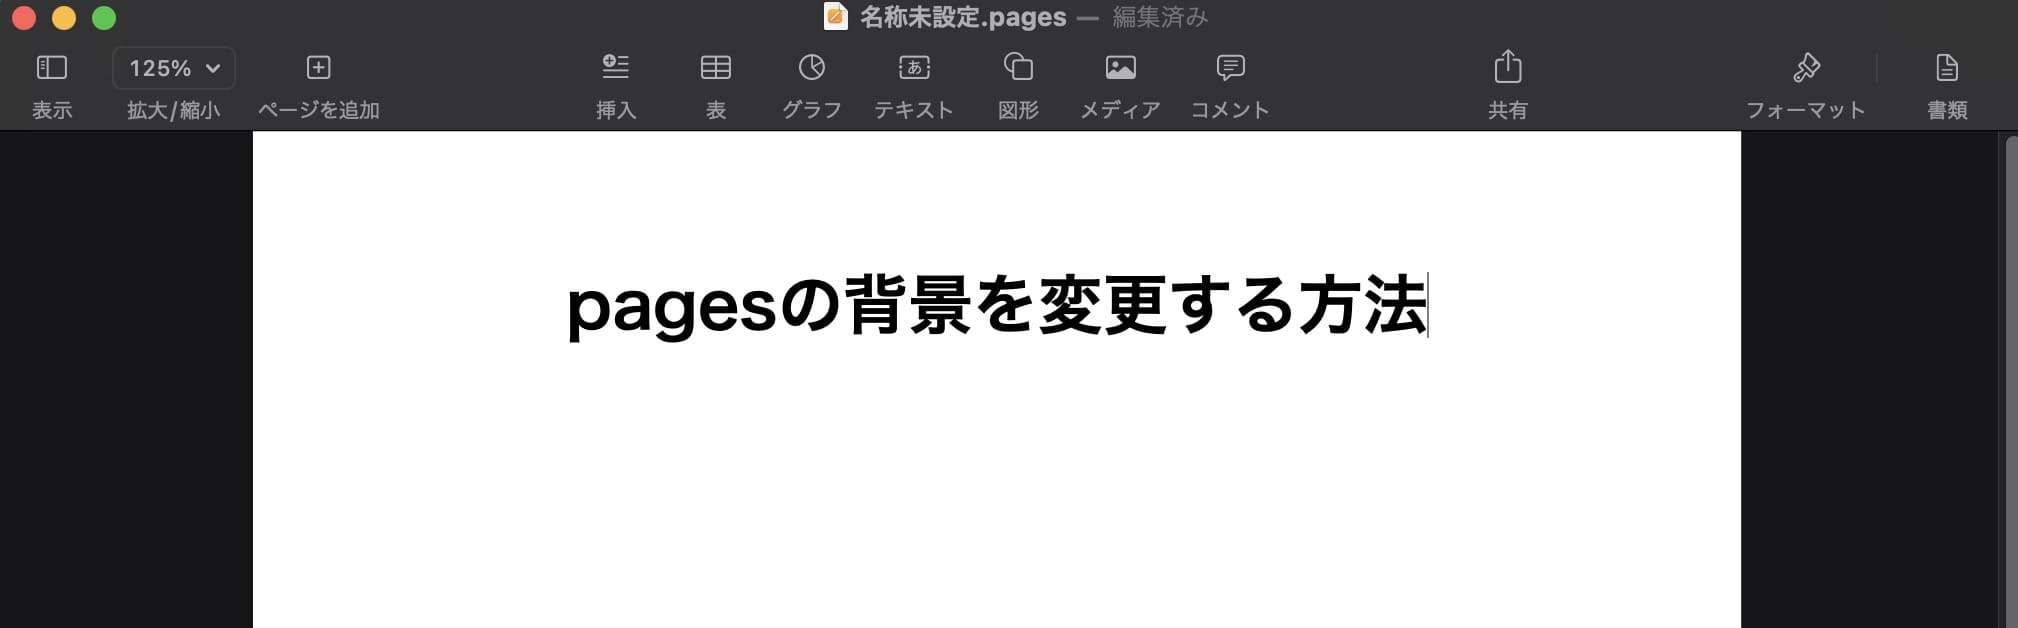 pagesの背景を変更する方法